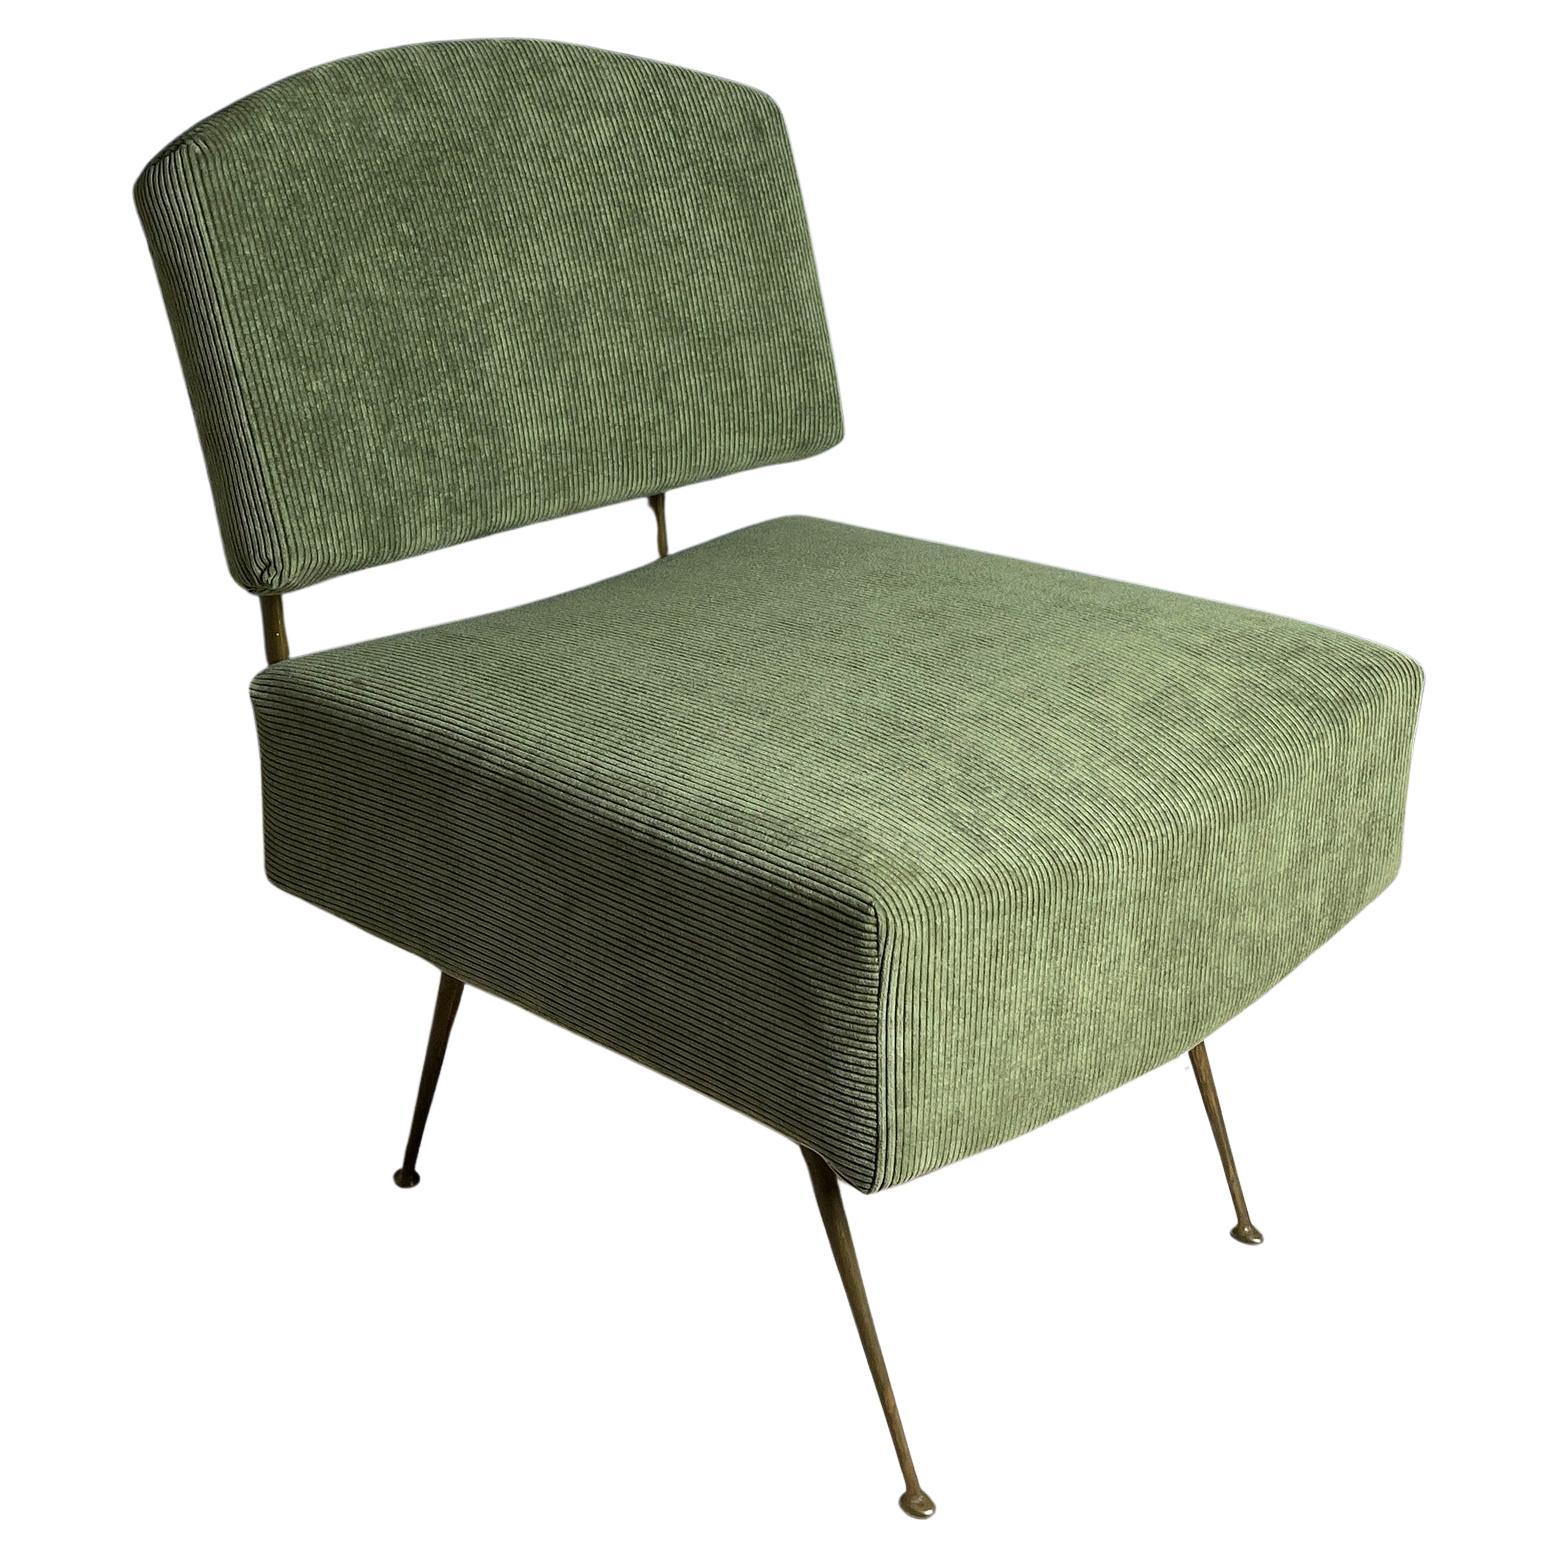 Vintage green lounge chair Italy 1950s